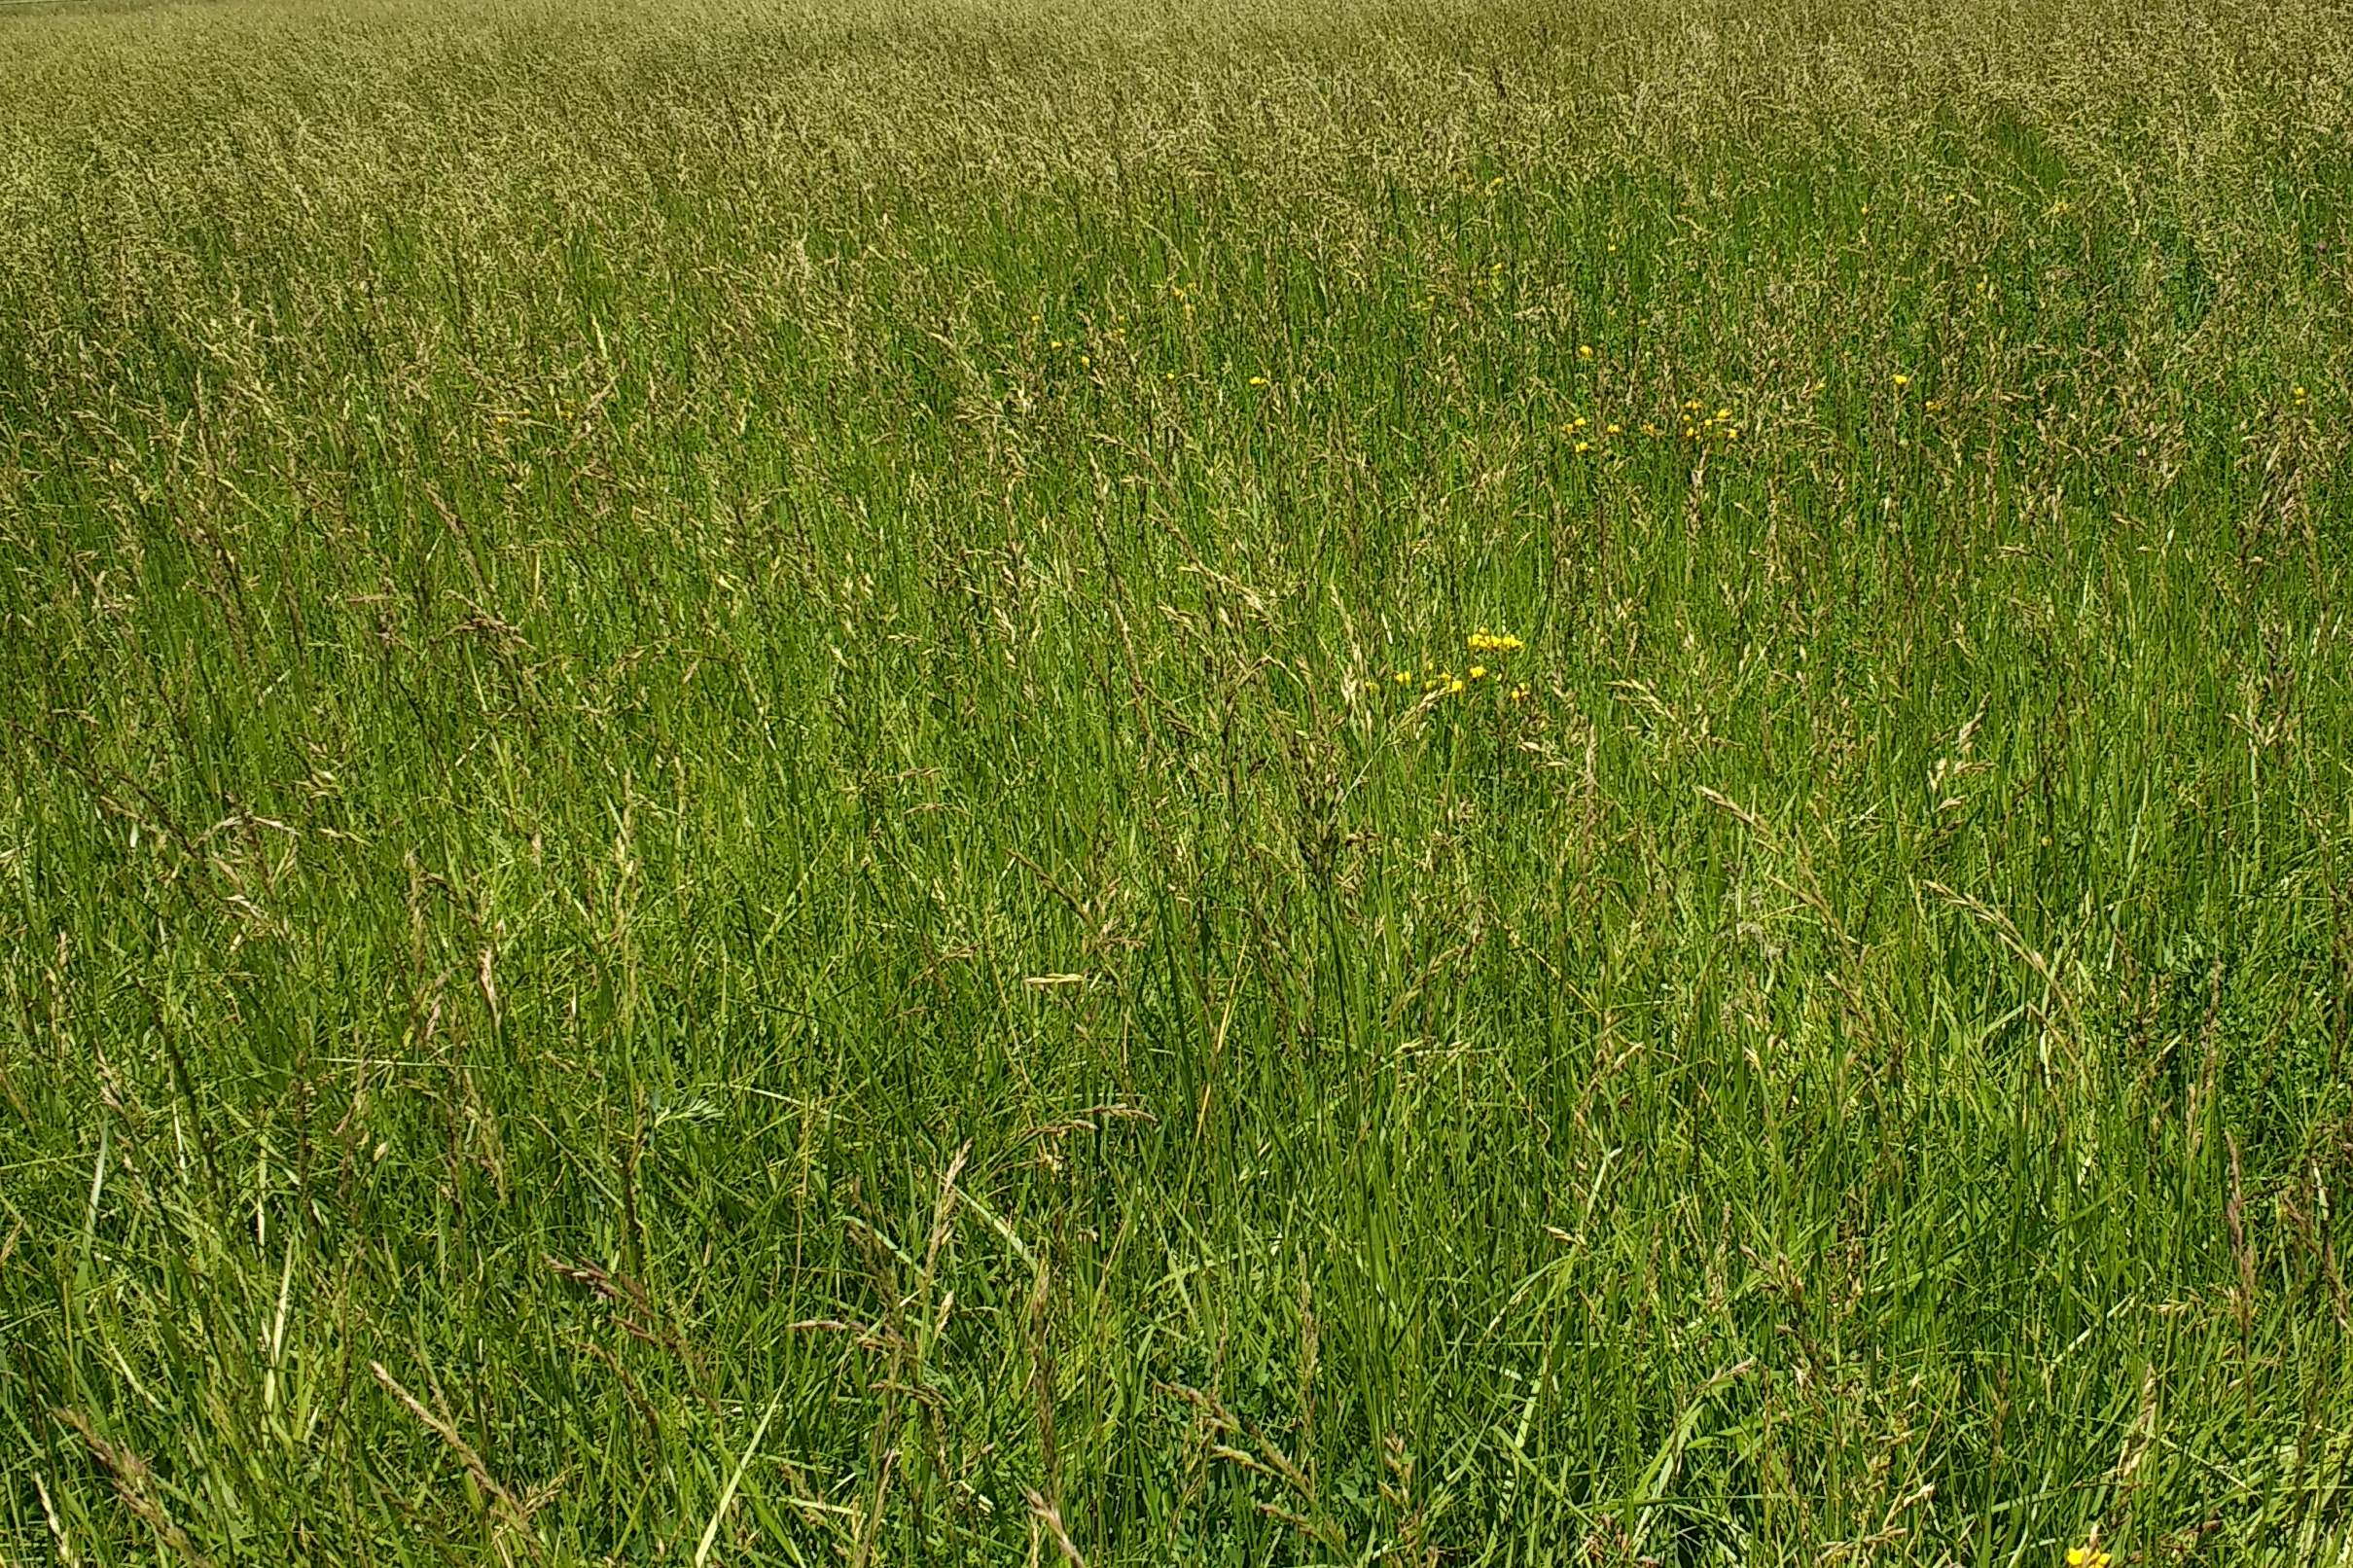 Picture of a field of different pasture grasses